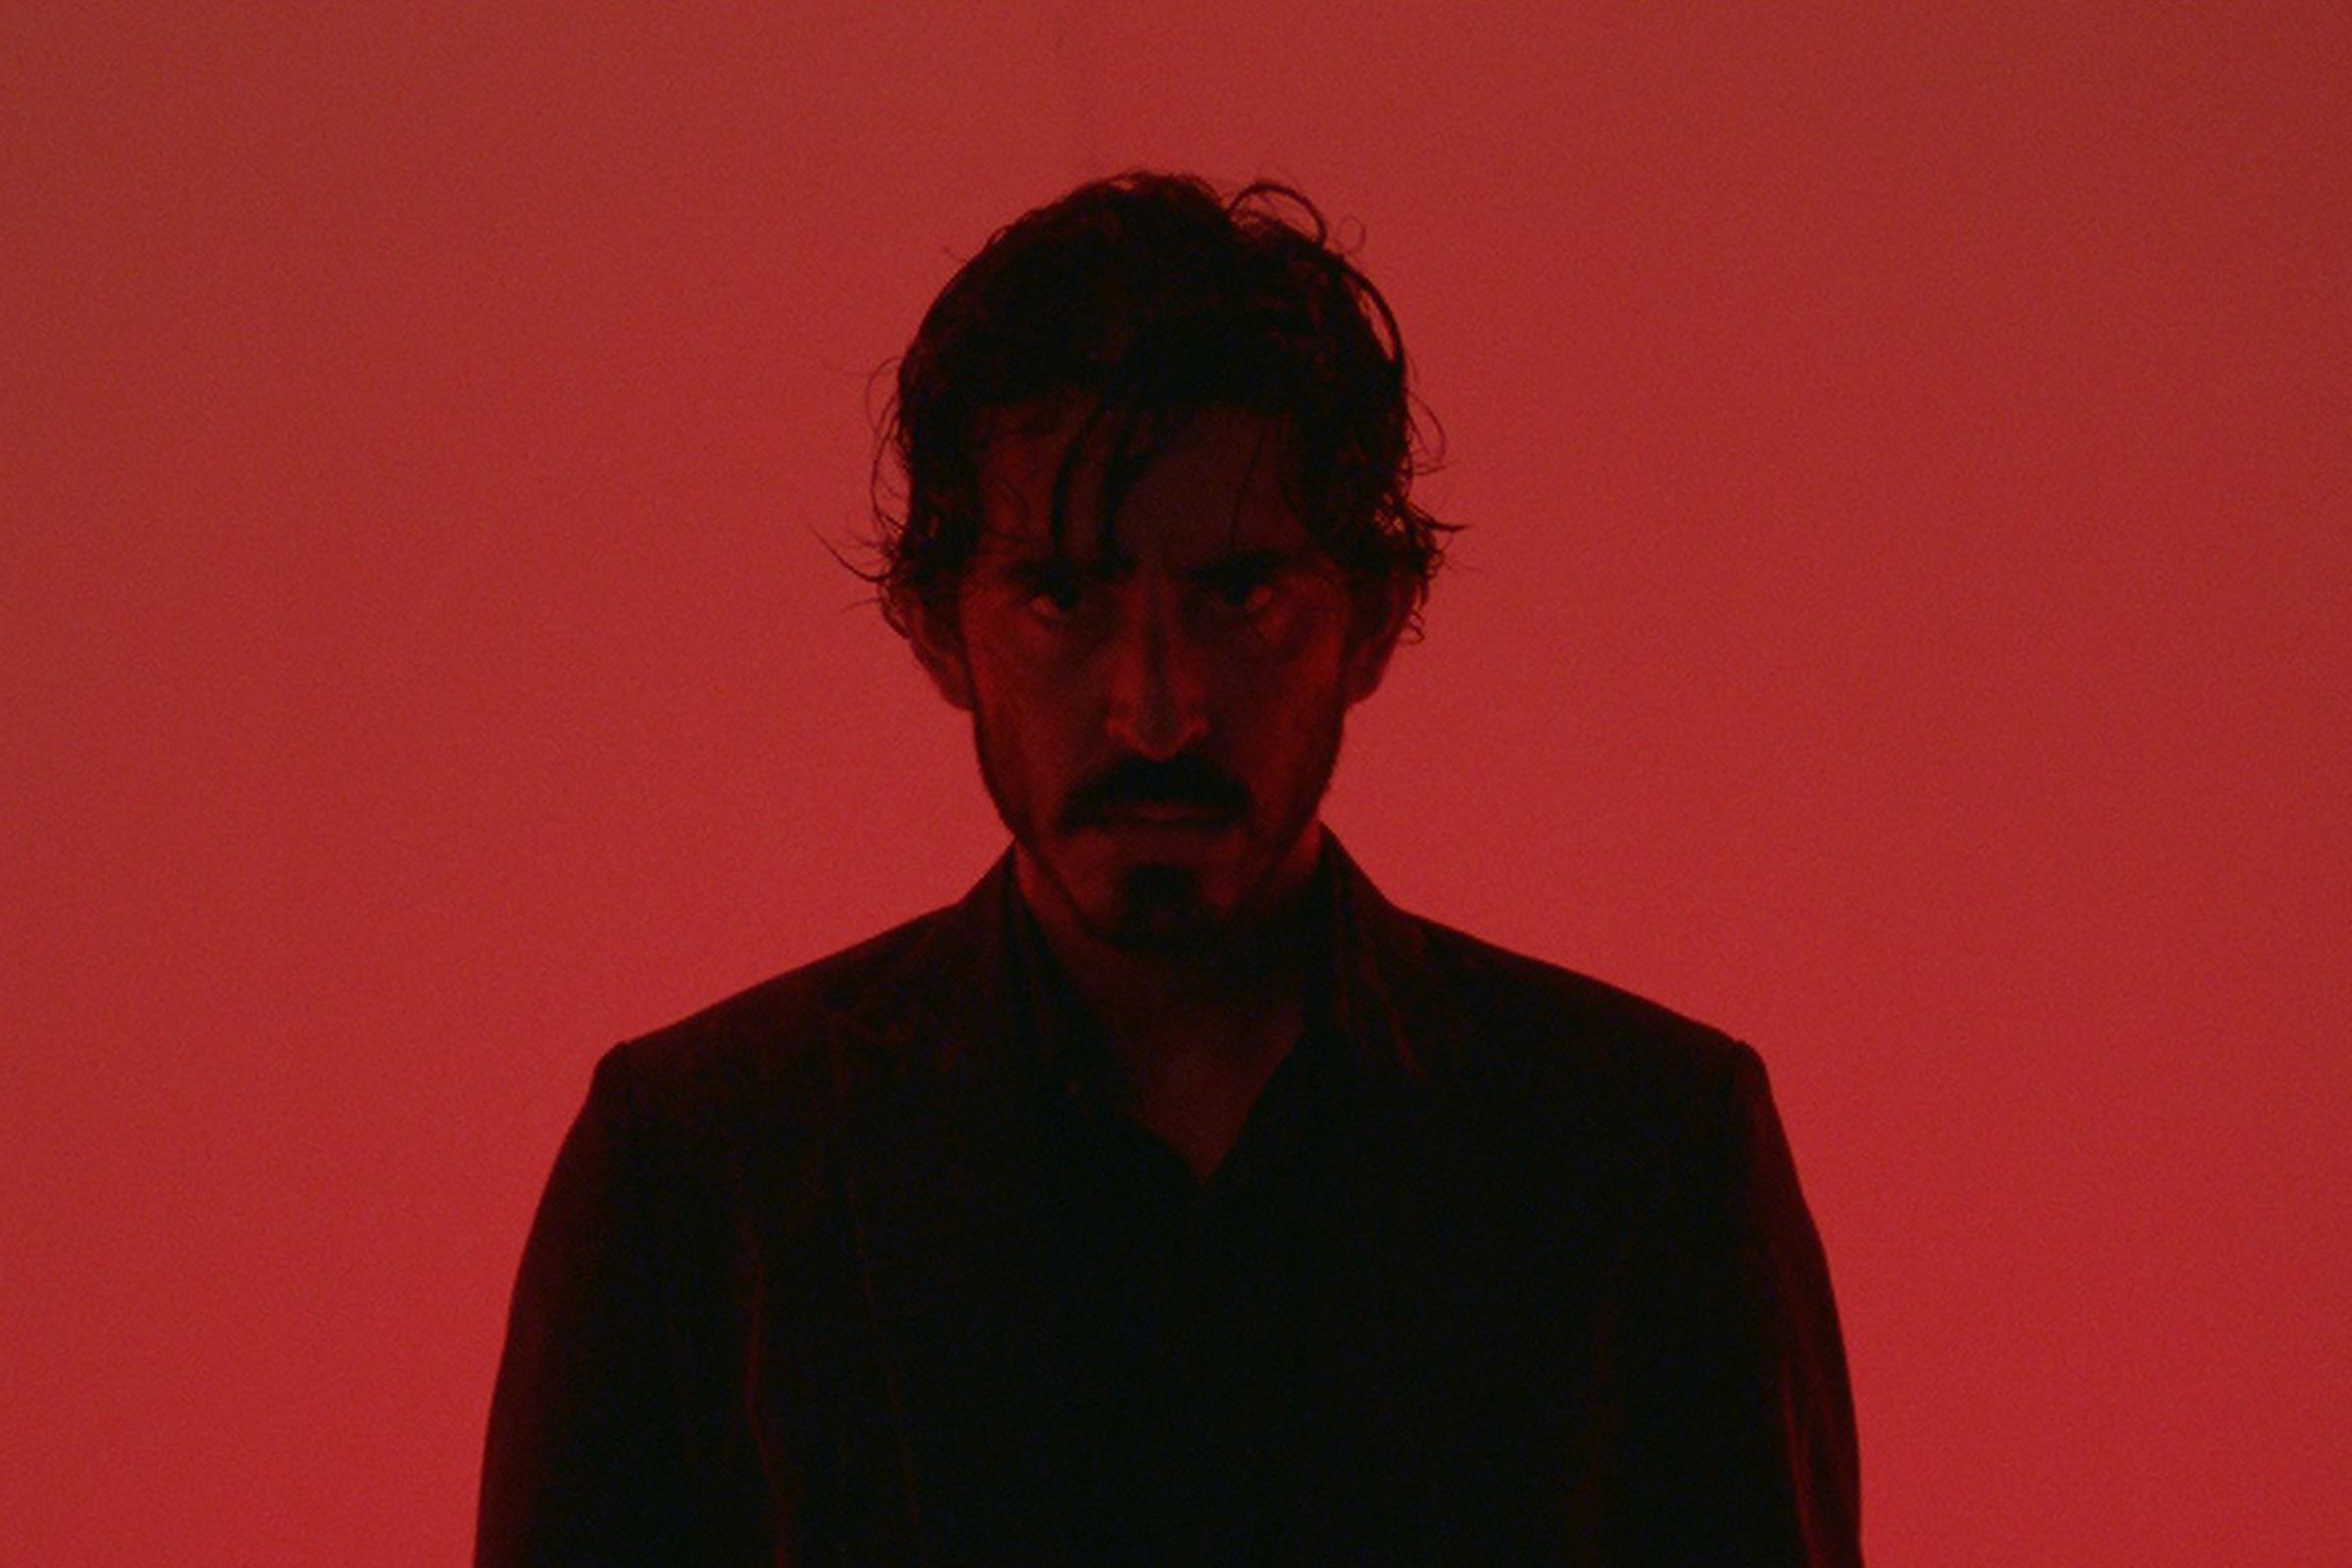 A man in a black suit and shirt backlit by red lighting that casts him in shadow.